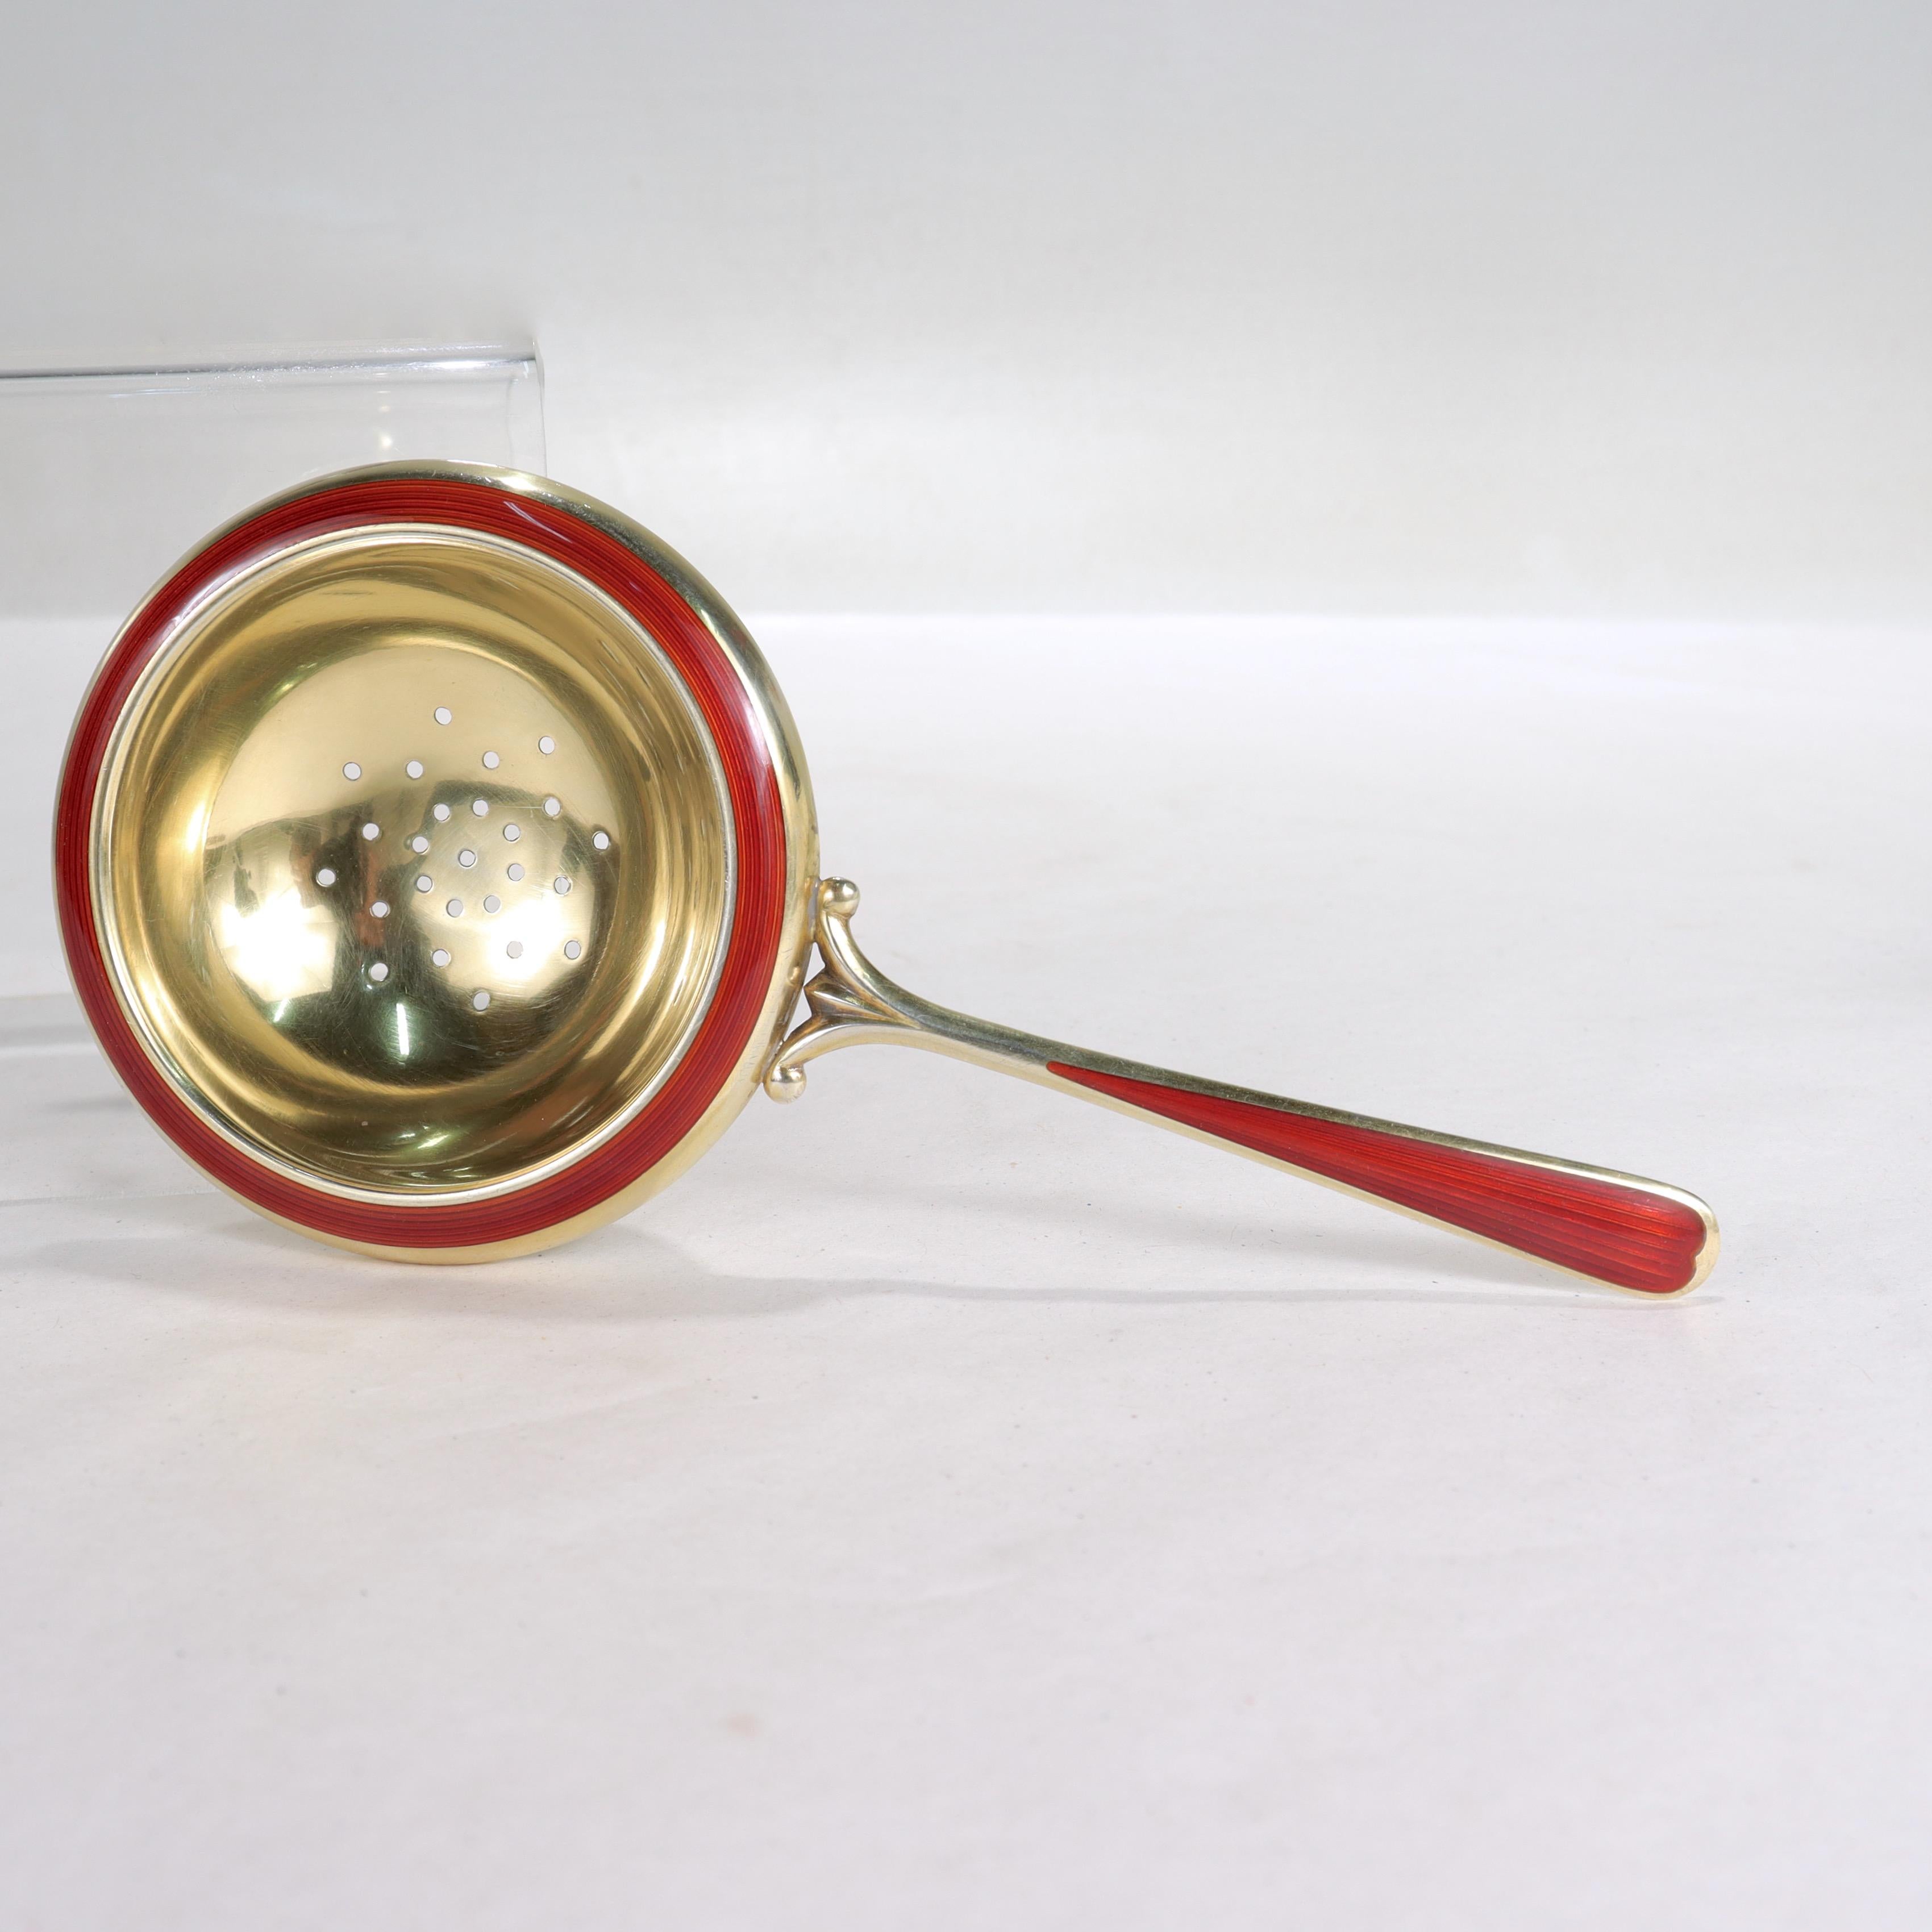 Antique Art Deco Red Enamel & Gilt Sterling Silver Tea Strainer by N.M. Thune For Sale 1